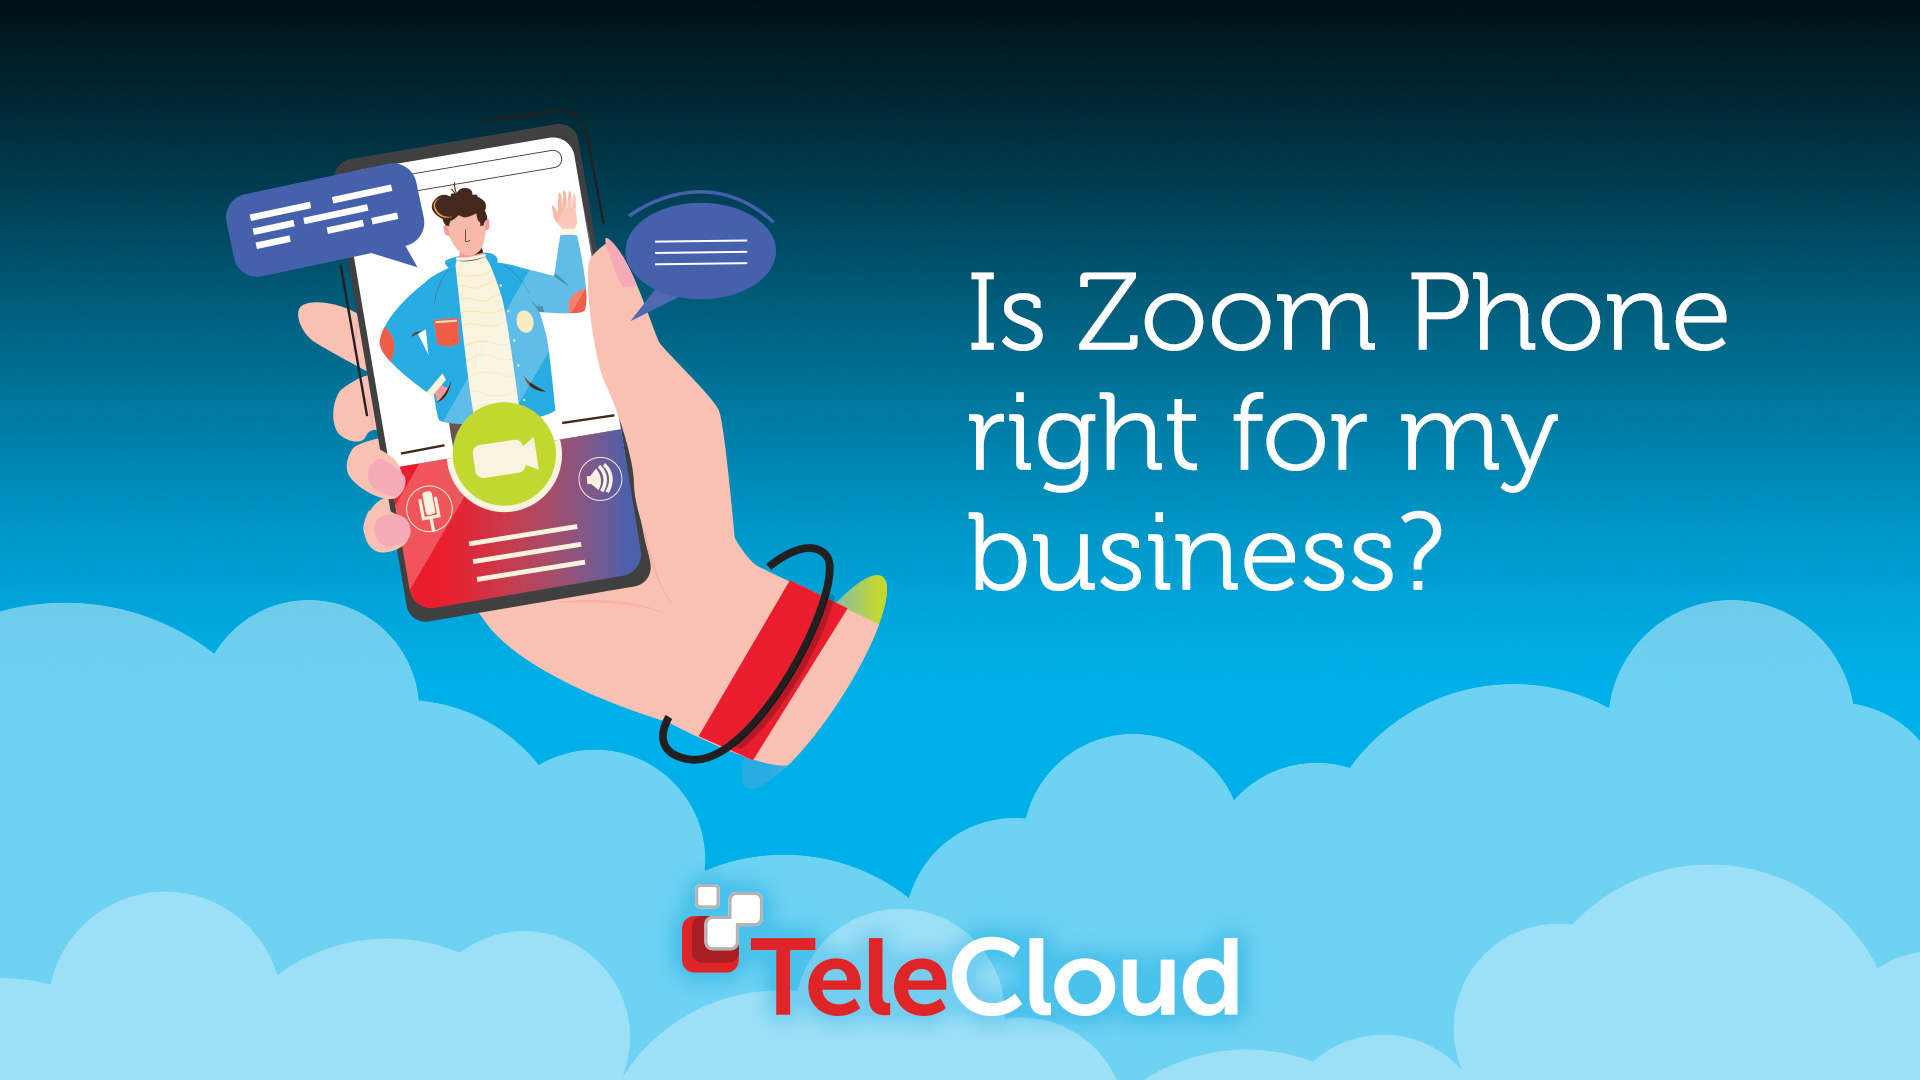 is Zoom phone right for my business?